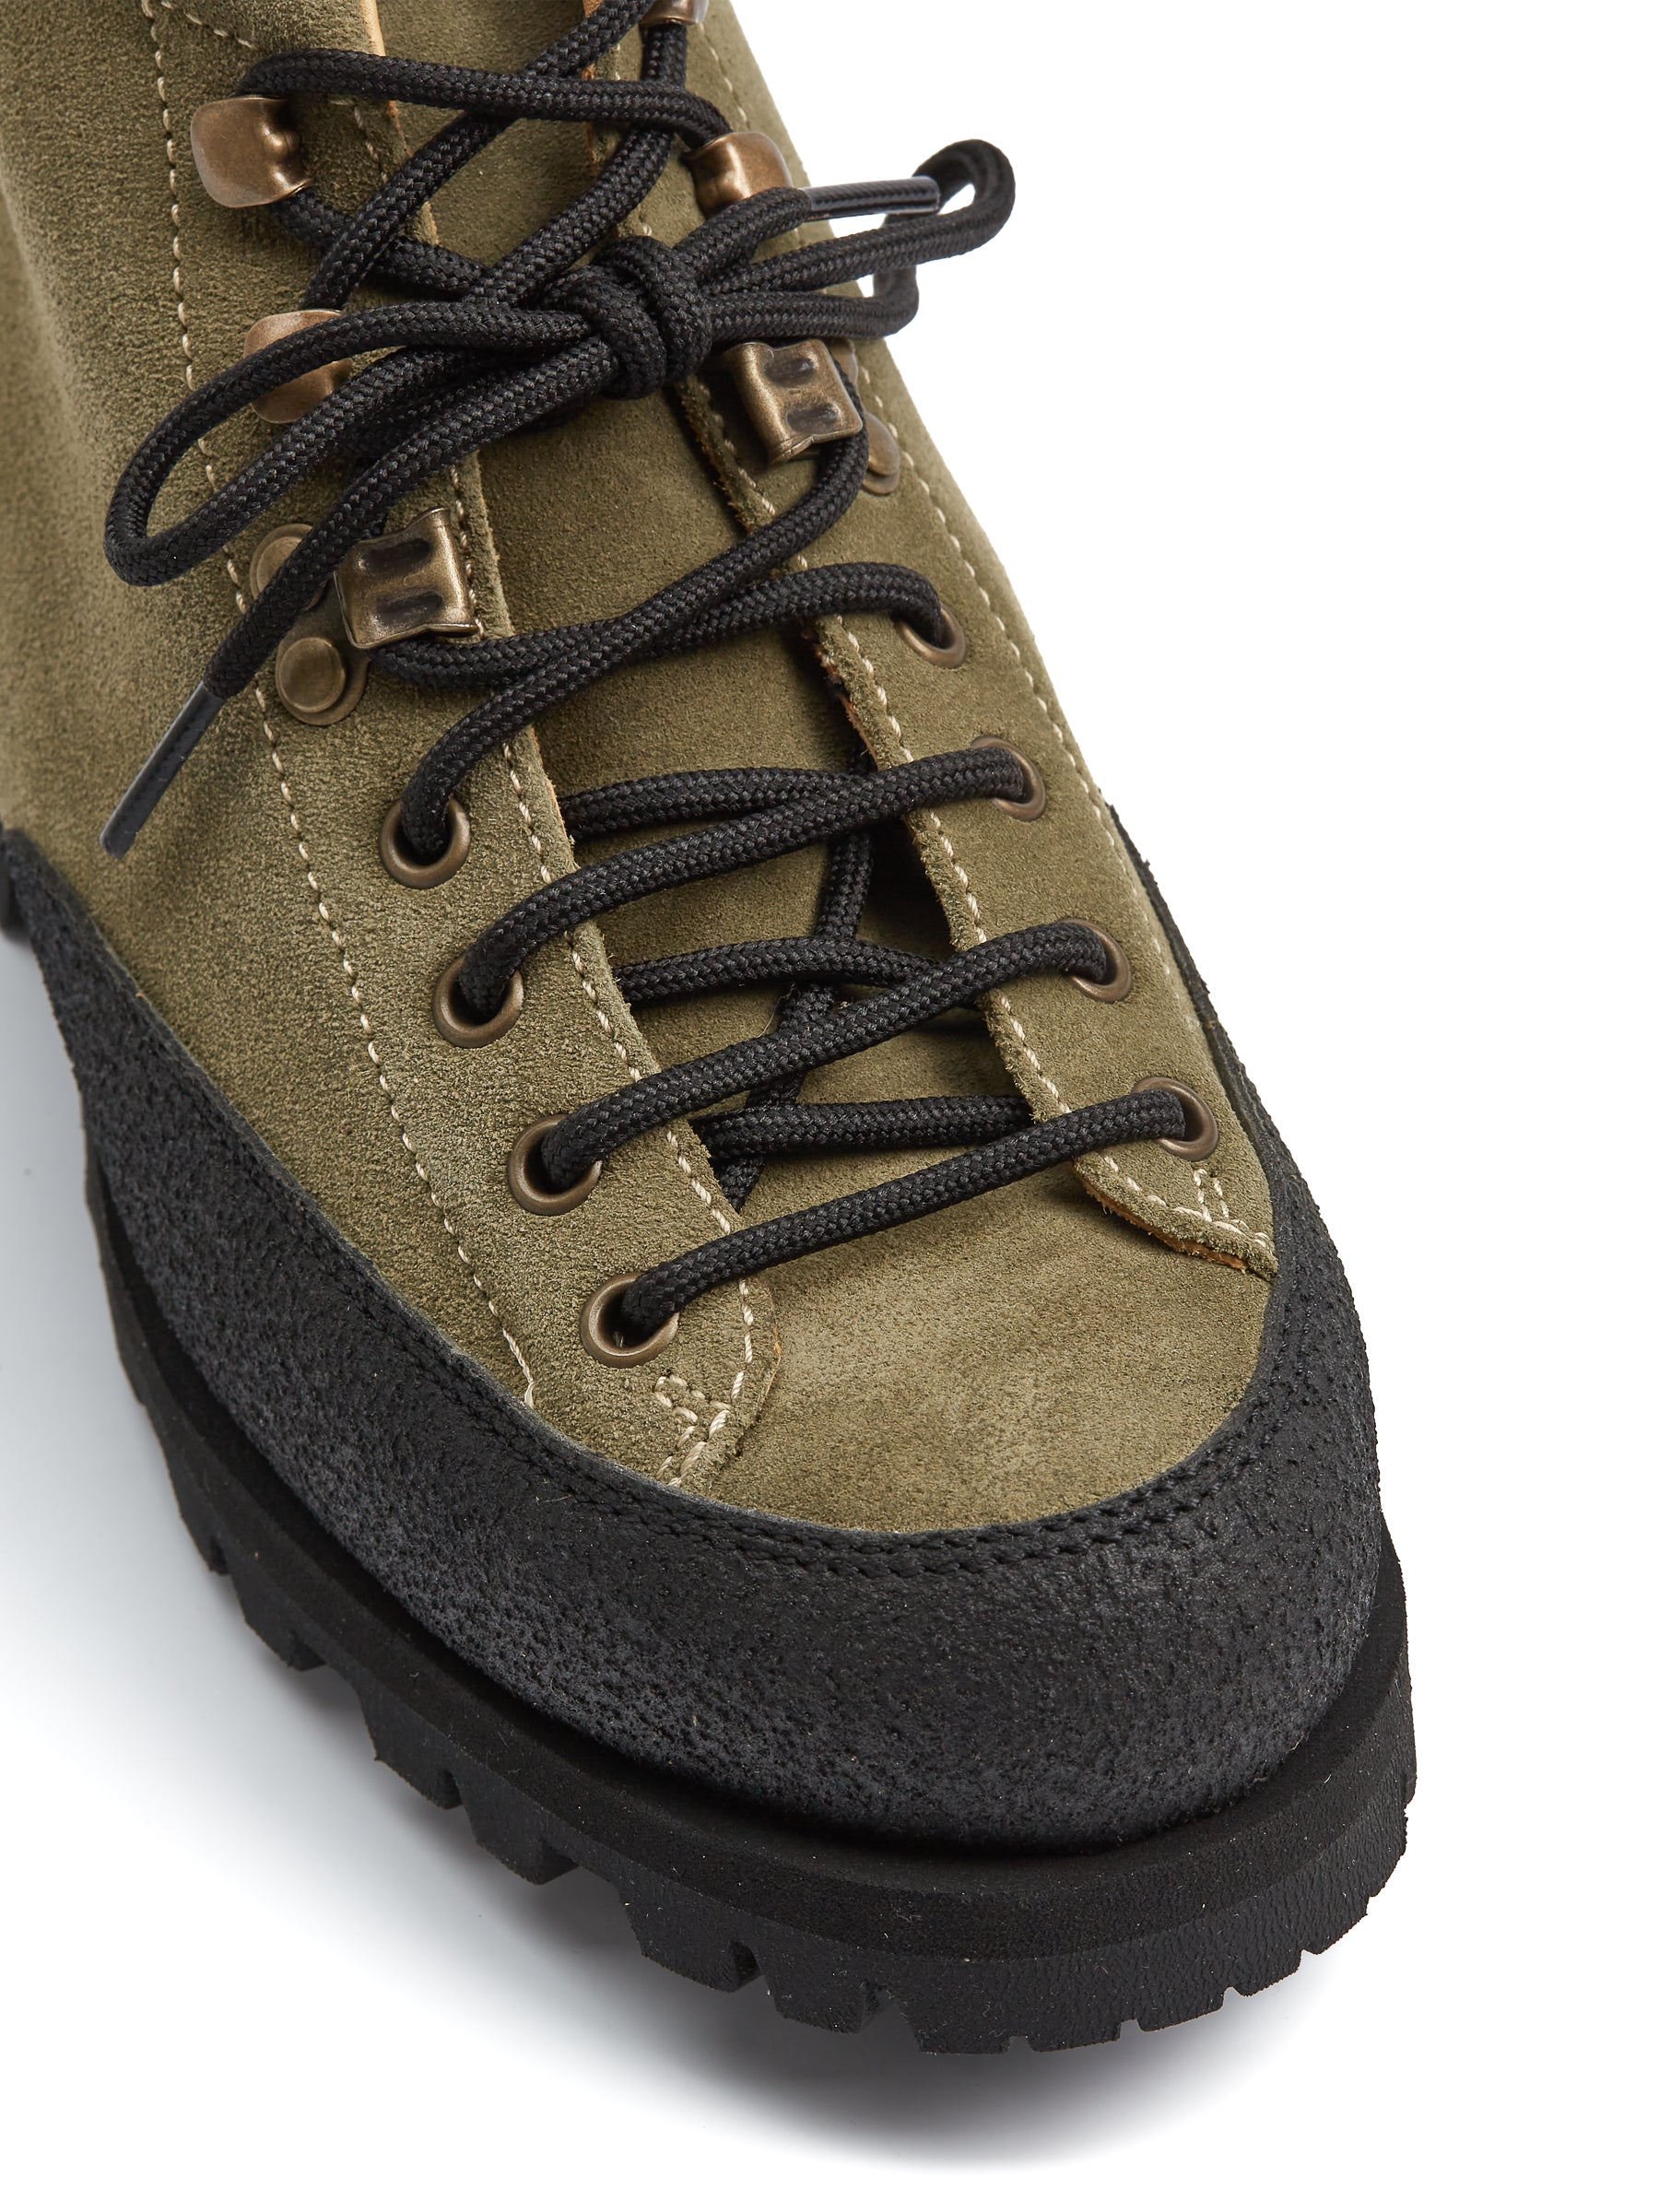 Paraboot Yosemite Hiking Boot Olive Green Suede